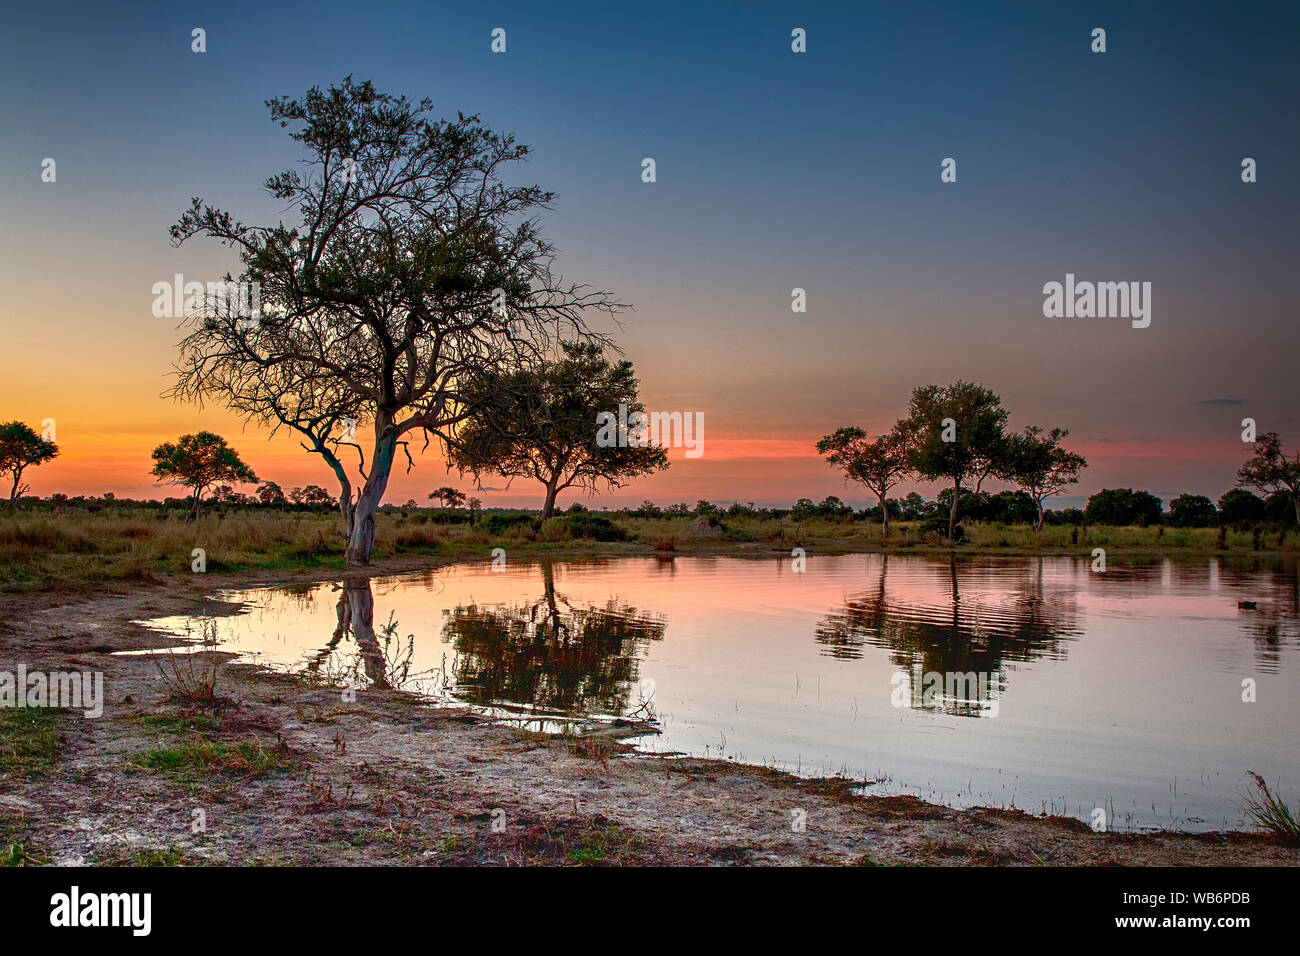 Sunset over a water hole in the Okavango Delta region of Botswana, Africa. African sunsets have to be seen to be believed! Stock Photo